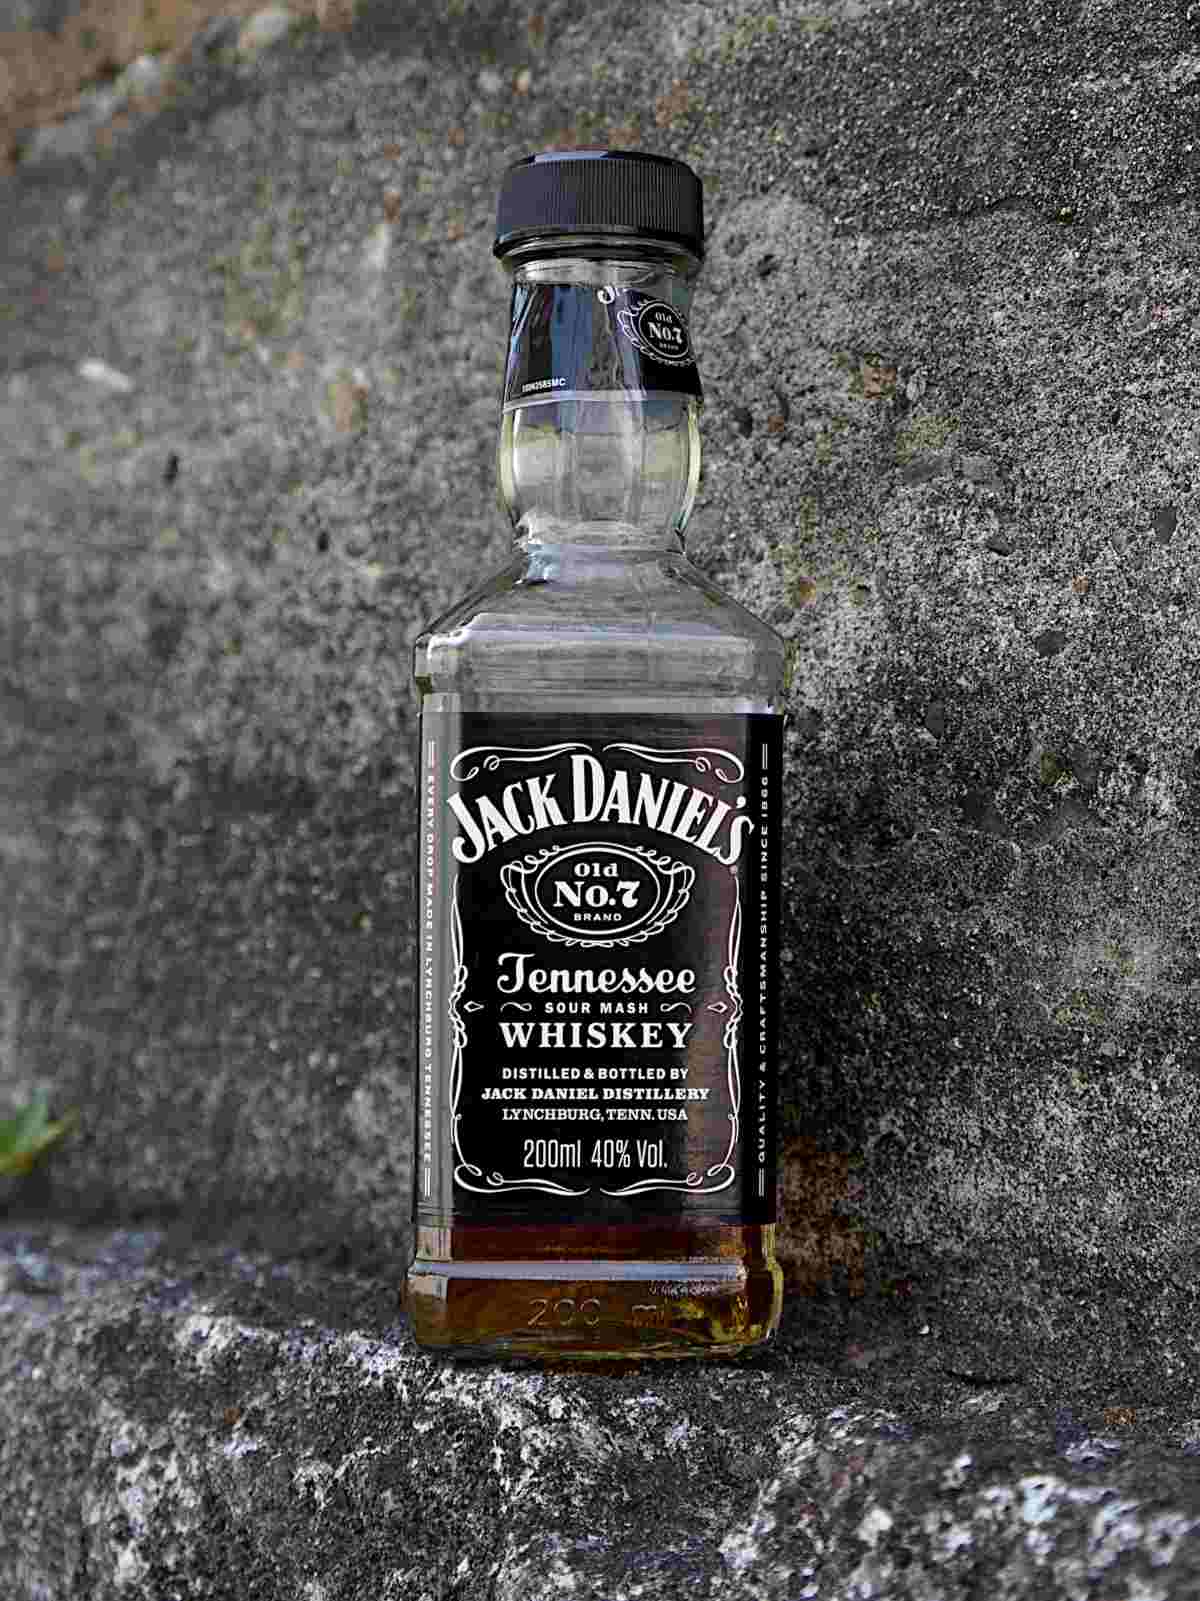 jack daniels old no 7 featured